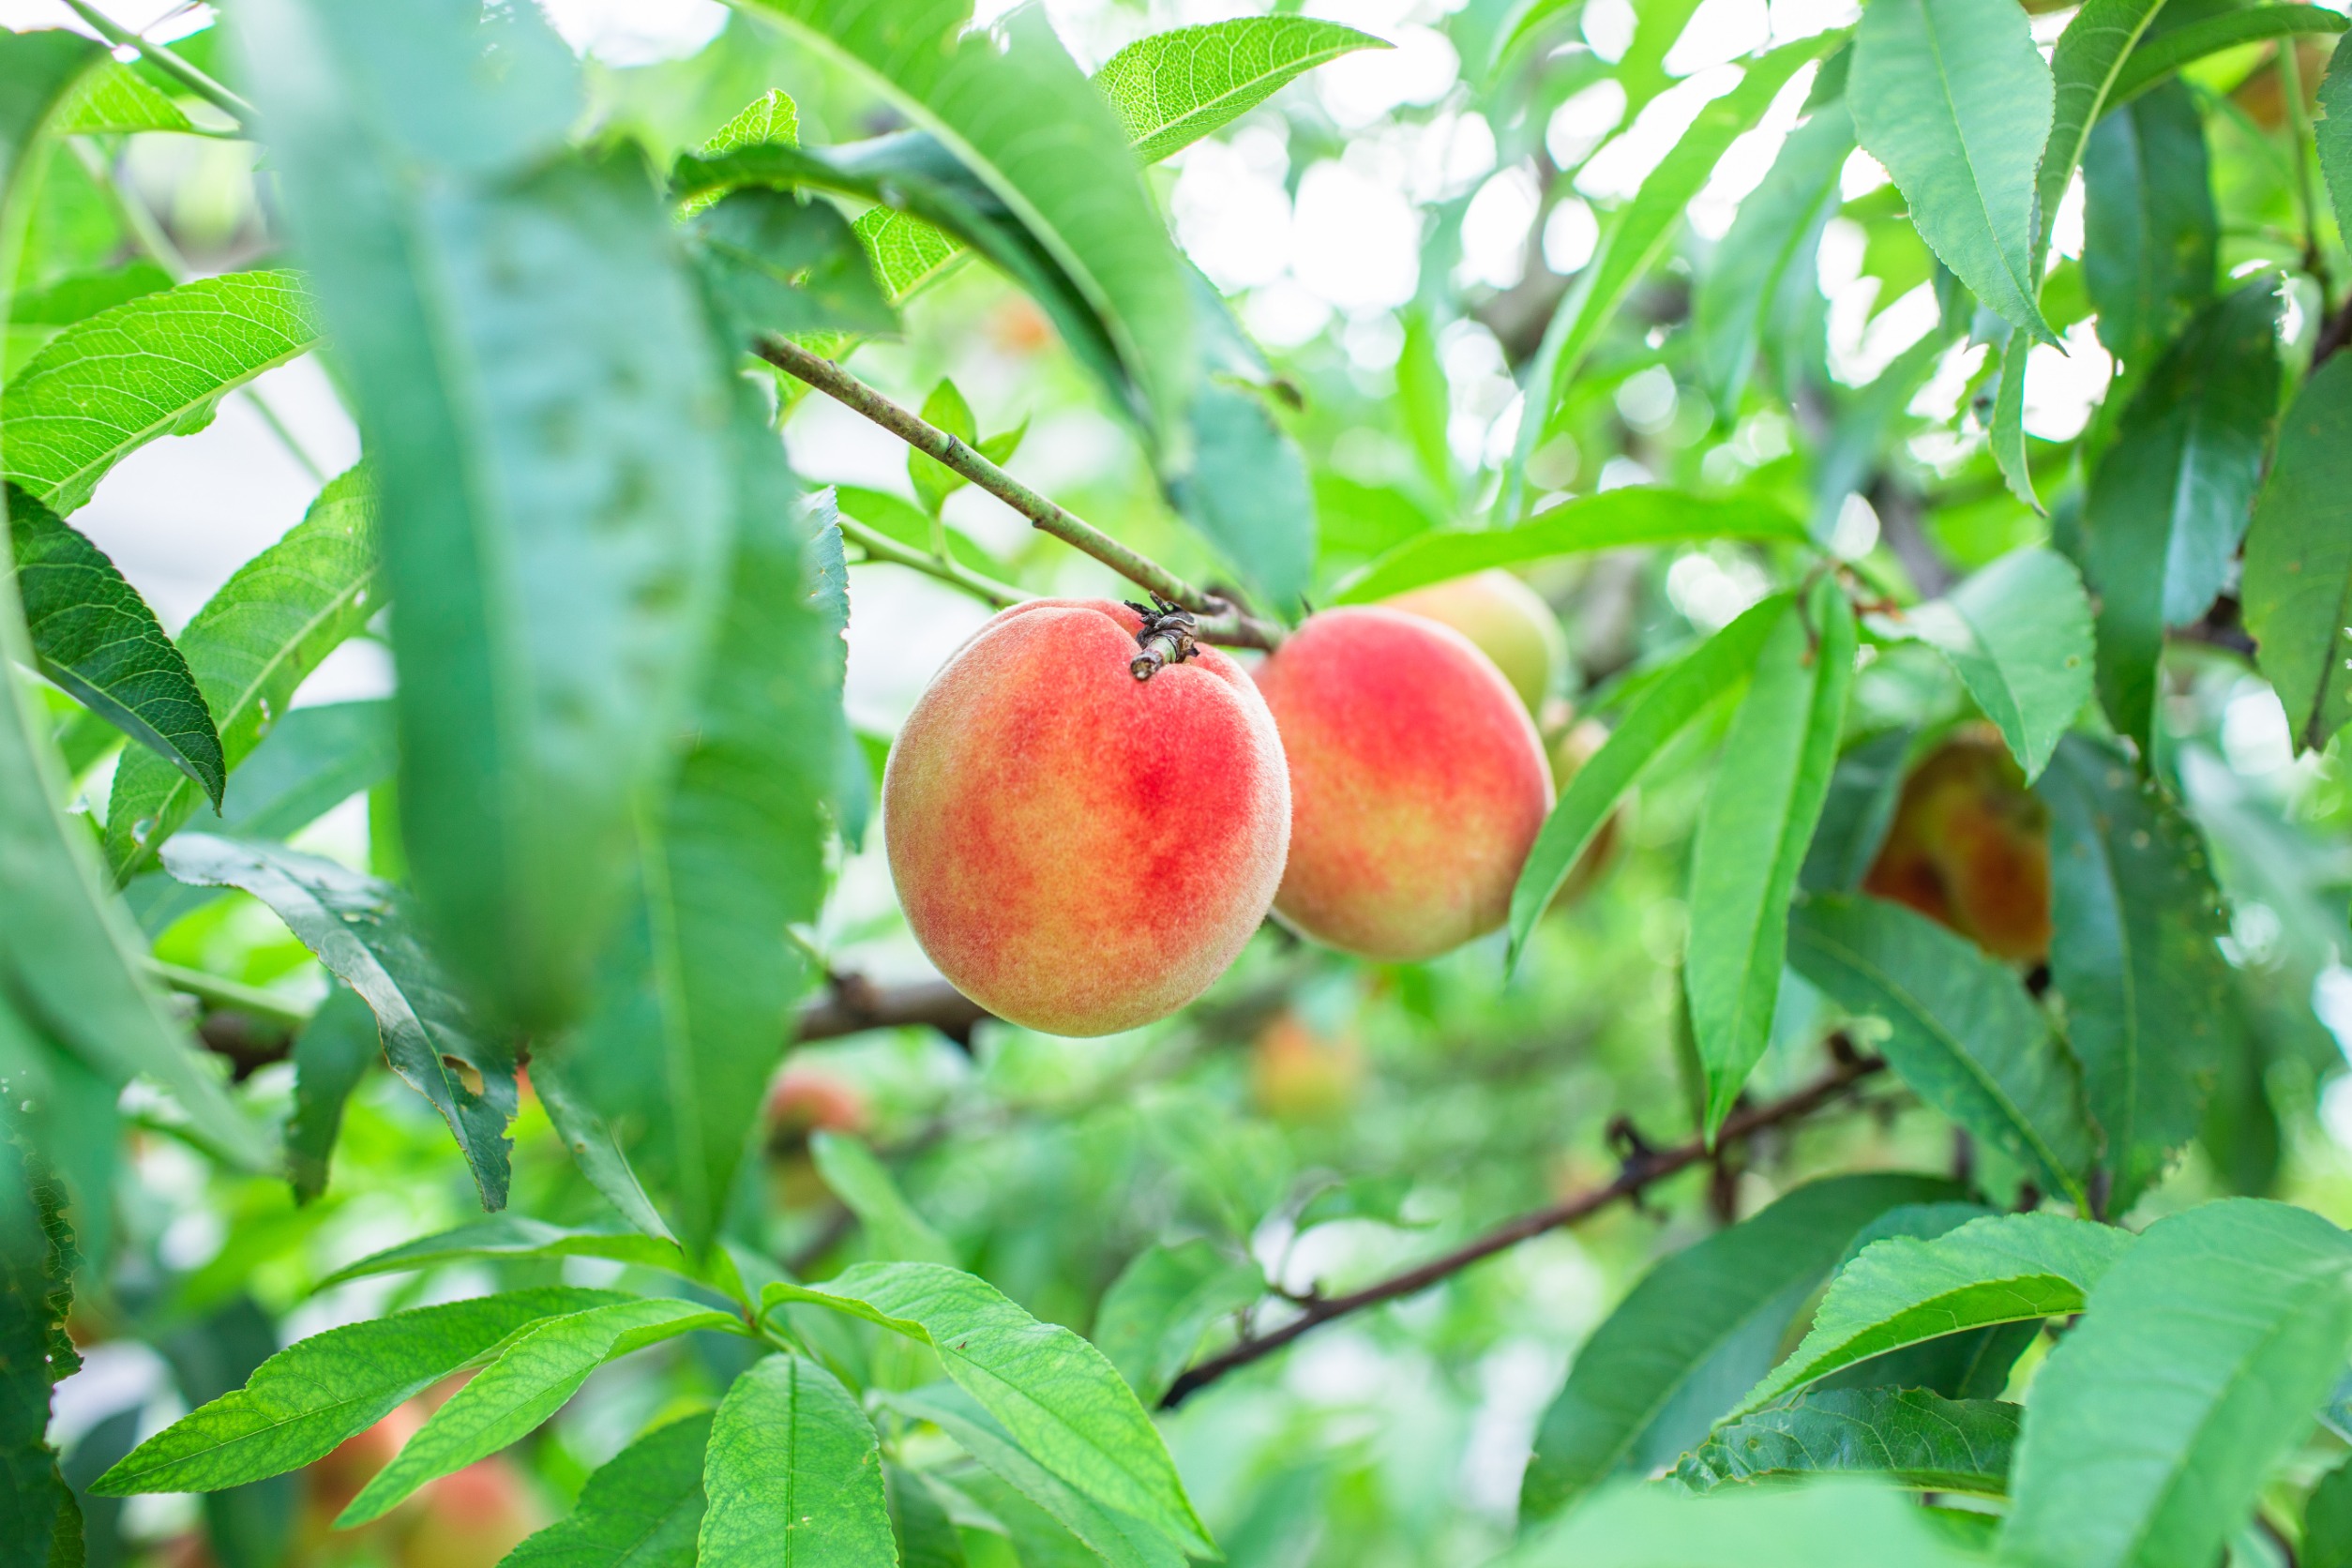 Care for peach trees